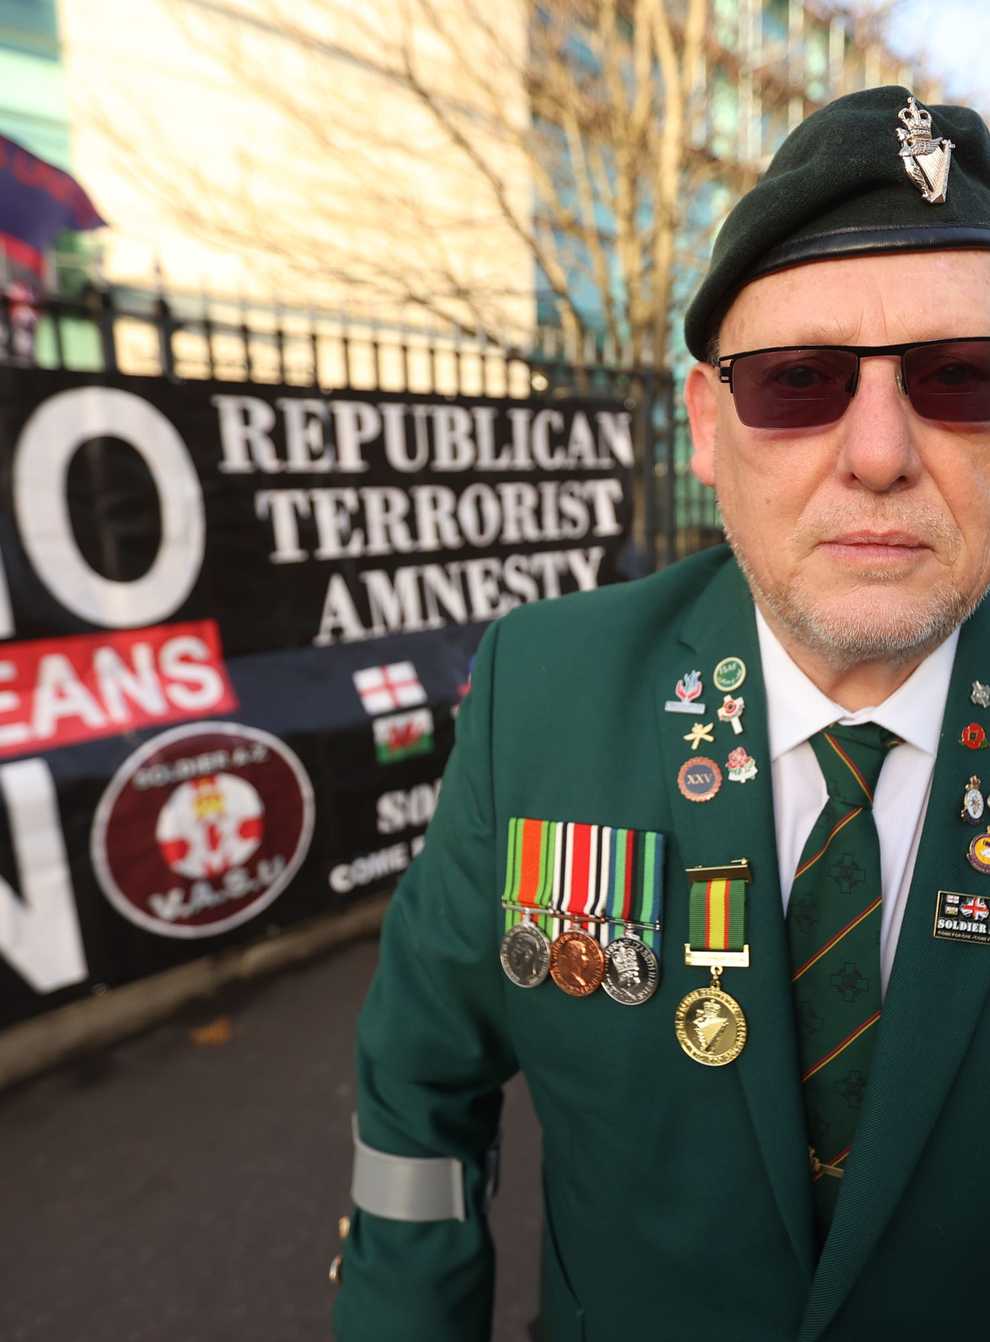 Former Ulster Defence Regiment (UDR) soldier Raymond Crawford, outside Laganside Courts in Belfast, in support of former Grenadier Guardsman David Holden, as a judgment is expected to be delivered in the trial of the former soldier who is charged with the unlawful killing of Aidan McAnespie, 18, close to a checkpoint in Co Tyrone in 1988 (Liam McBurney/PA)